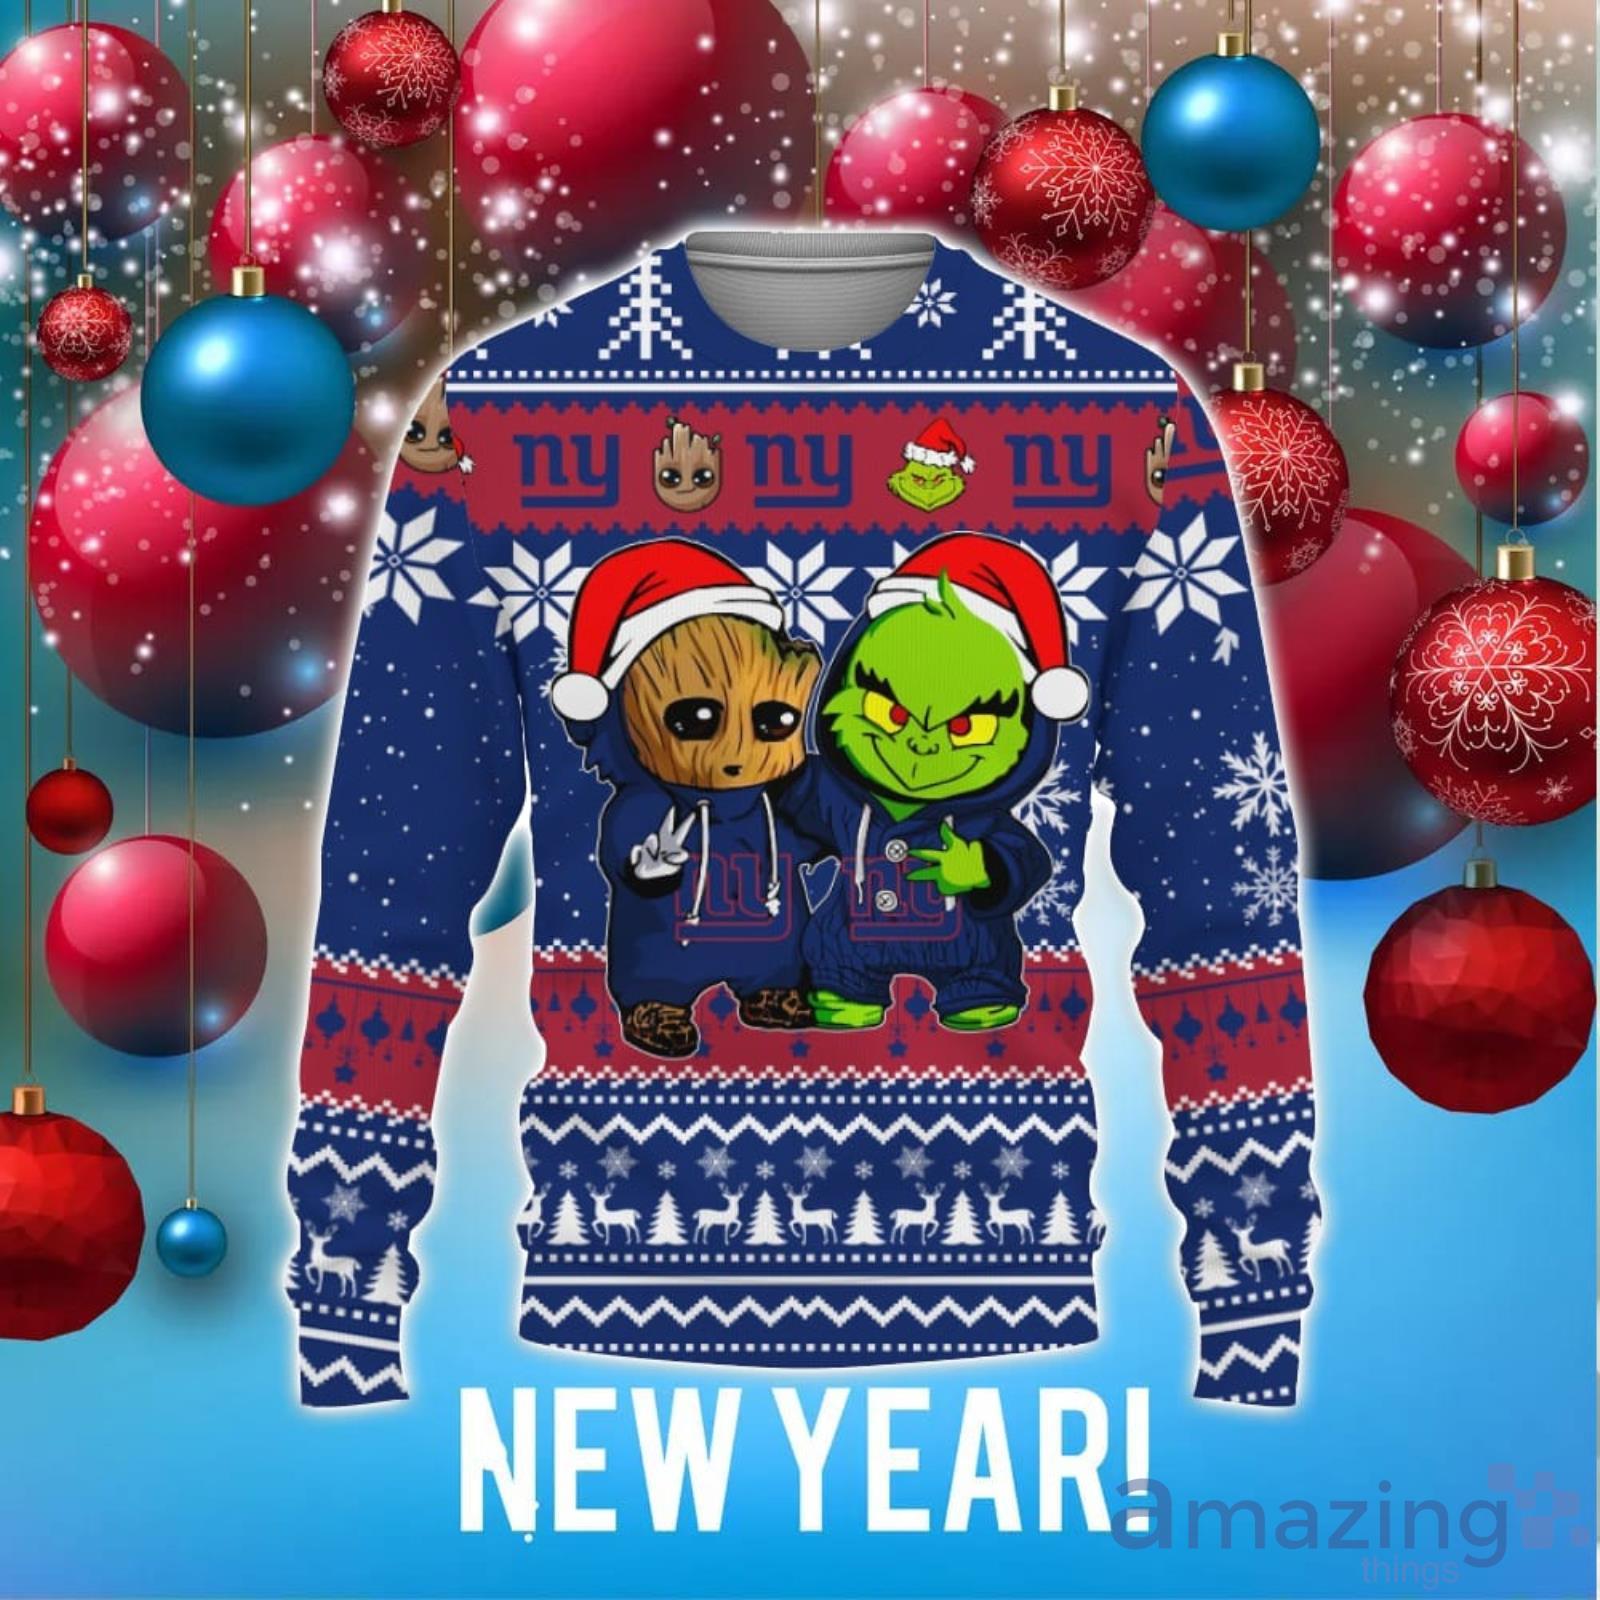 Dallas Mavericks Baby Groot And Grinch Ugly Christmas Sweater